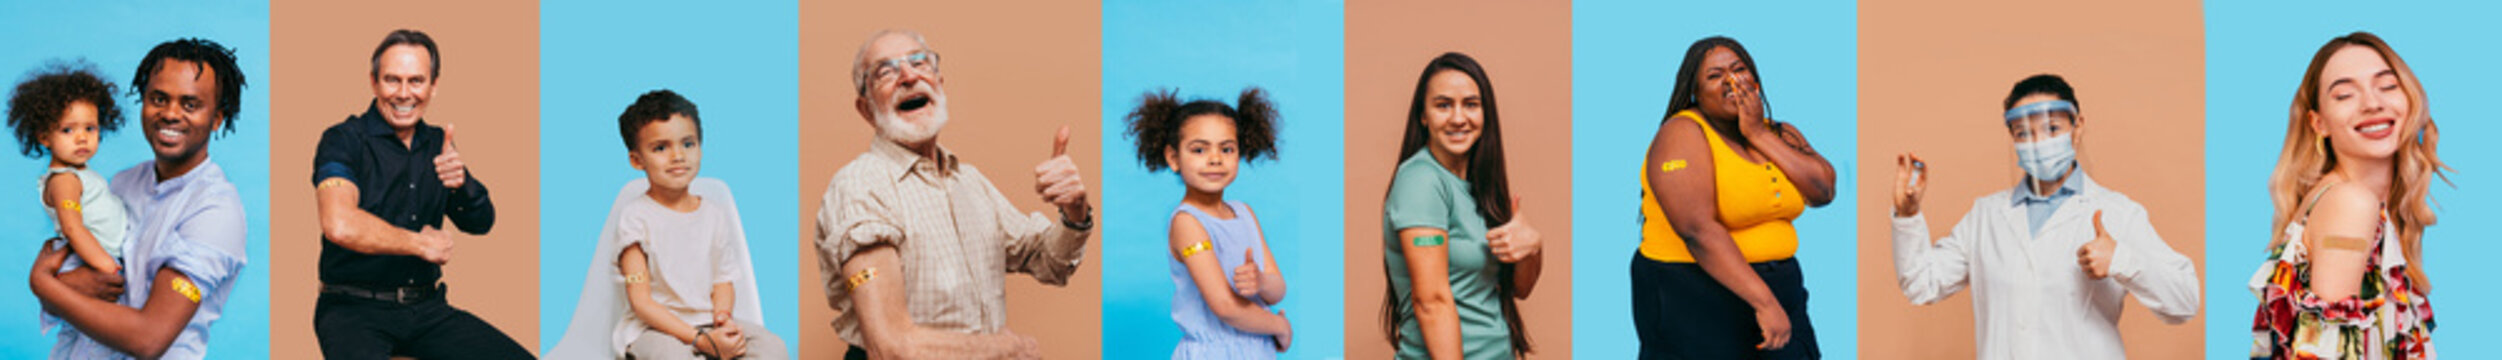 Coronavirus vaccination campaign banner, several portraits of diverse people getting vaccinated against covid-19 and showing prouply the injection plaster